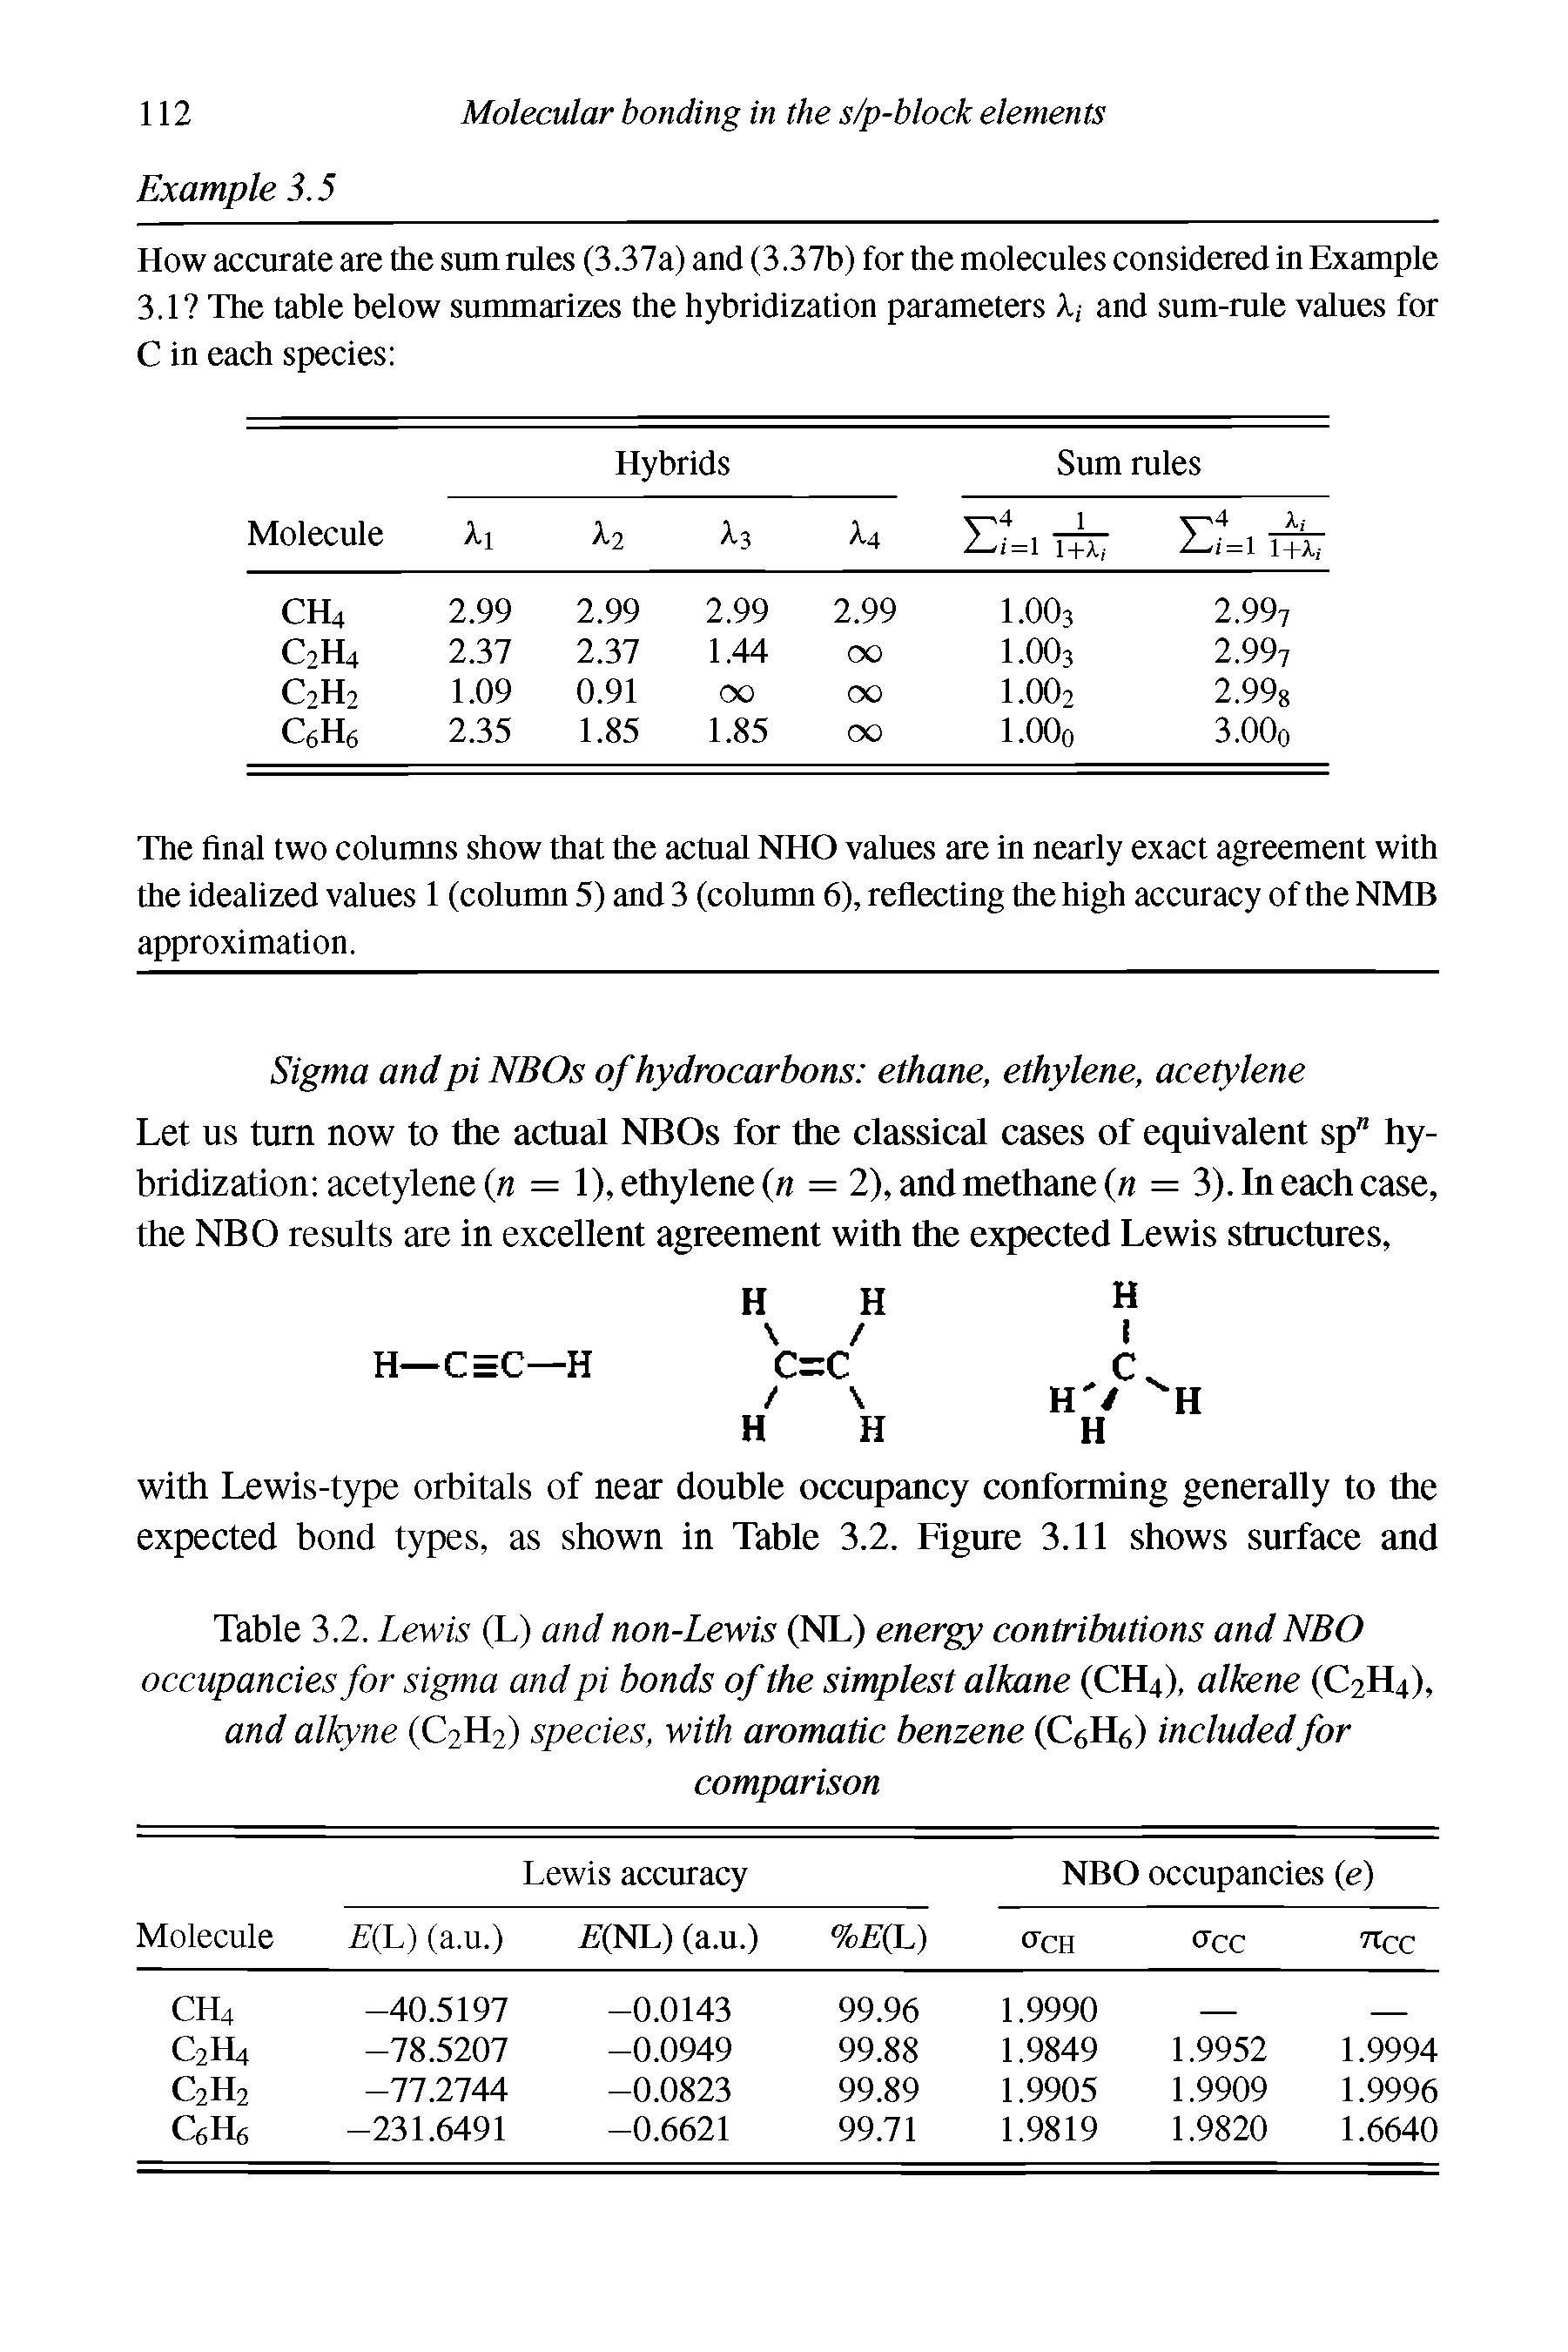 Table 3.2. Lewis (L) and non-Lewis (NL) energy contributions and NBO occupancies for sigma and pi bonds of the simplest alkane (CH4), alkene (C2H4), and alkyne (C2H2) species, with aromatic benzene (C fD includedfor...